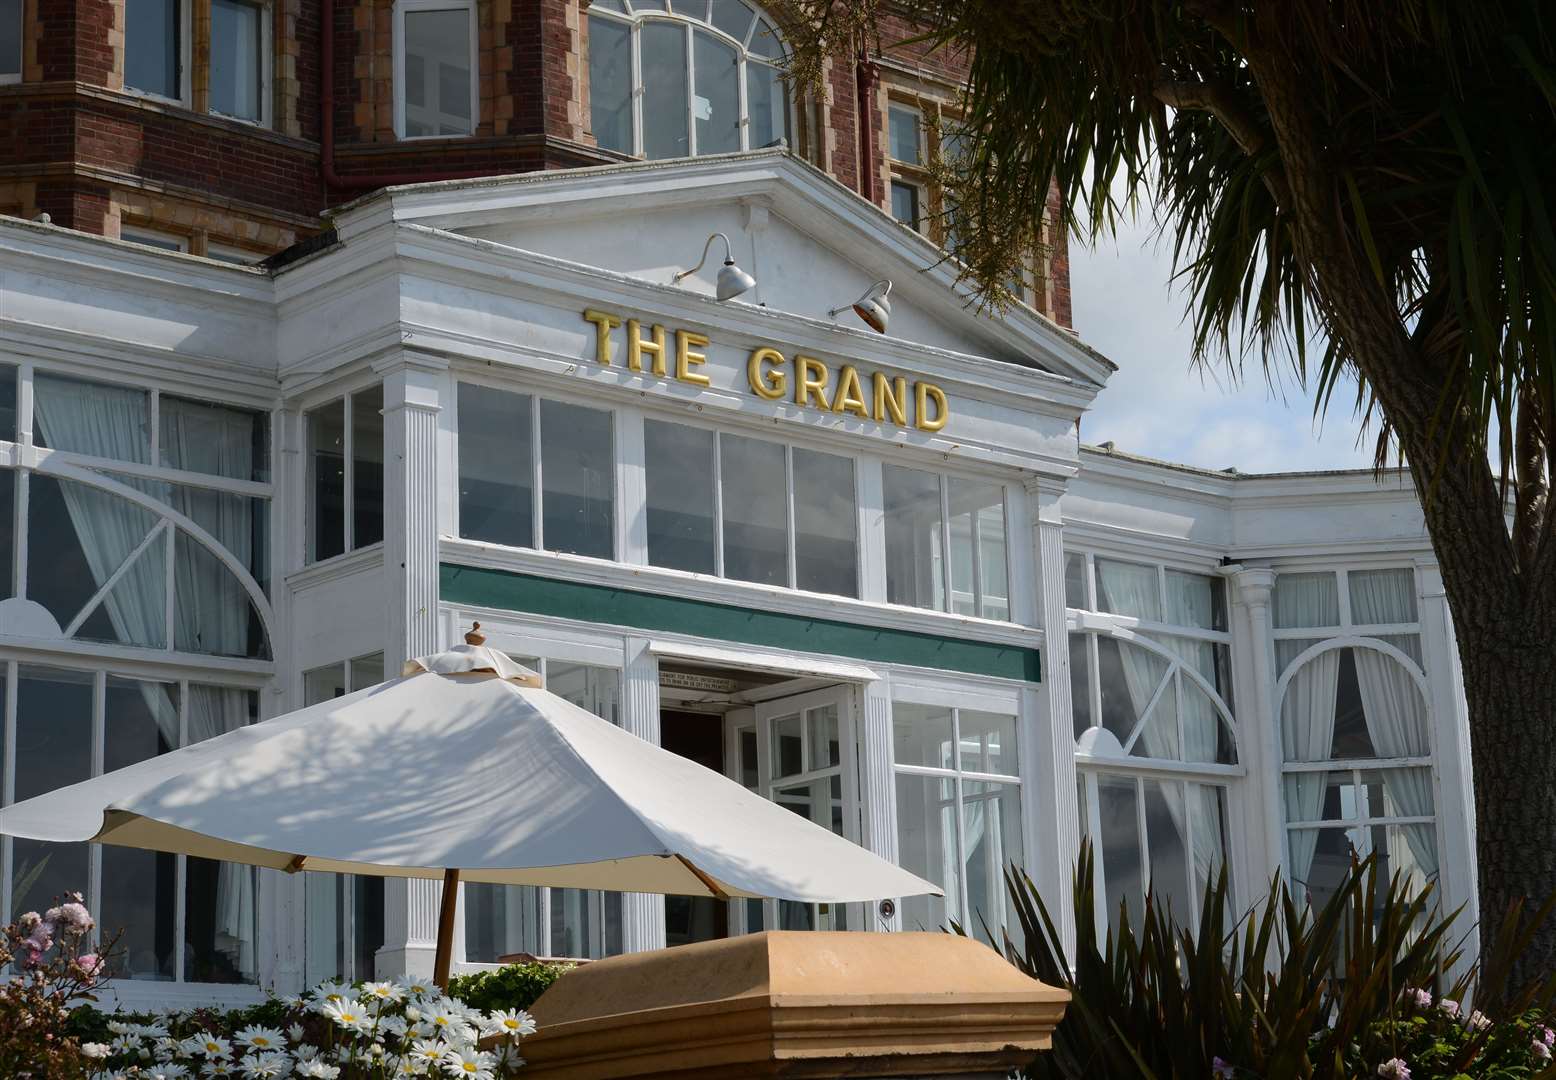 The attack happened at the Grand Hotel in Folkestone